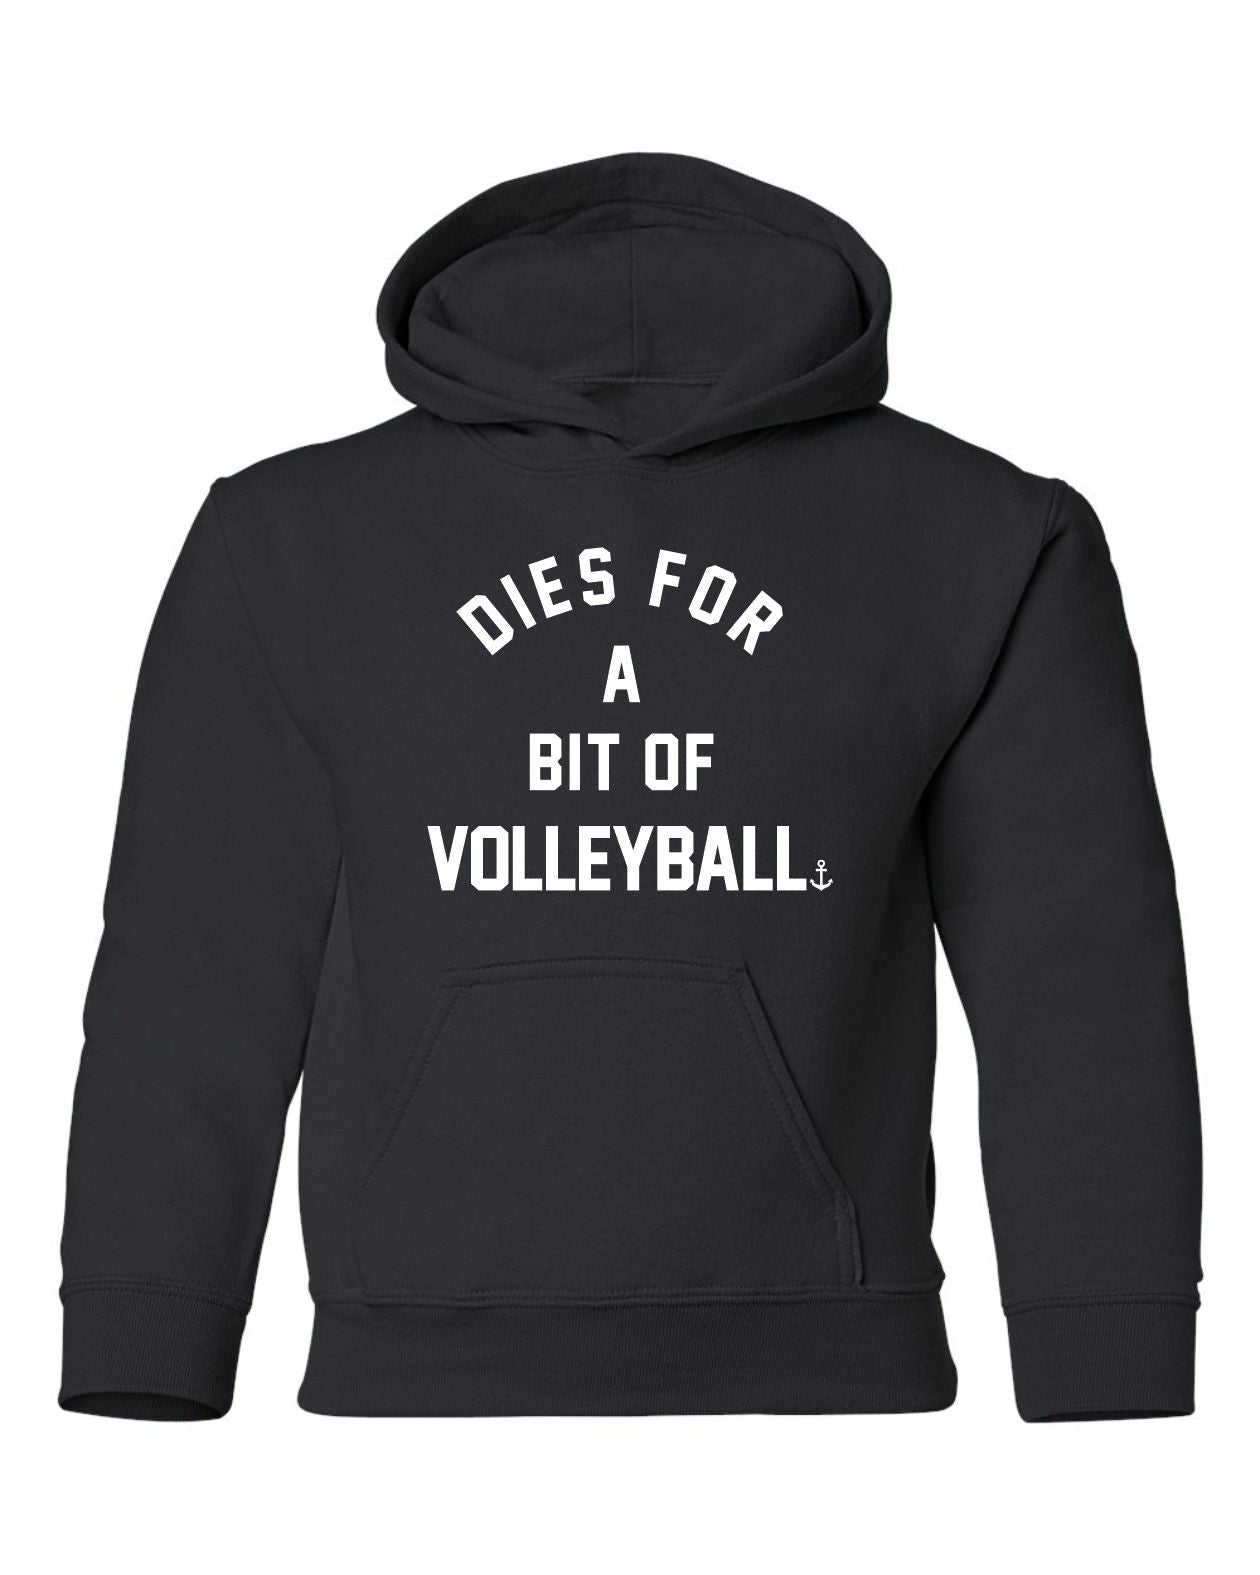 "Dies For A Bit Of Volleyball" Youth Hoodie